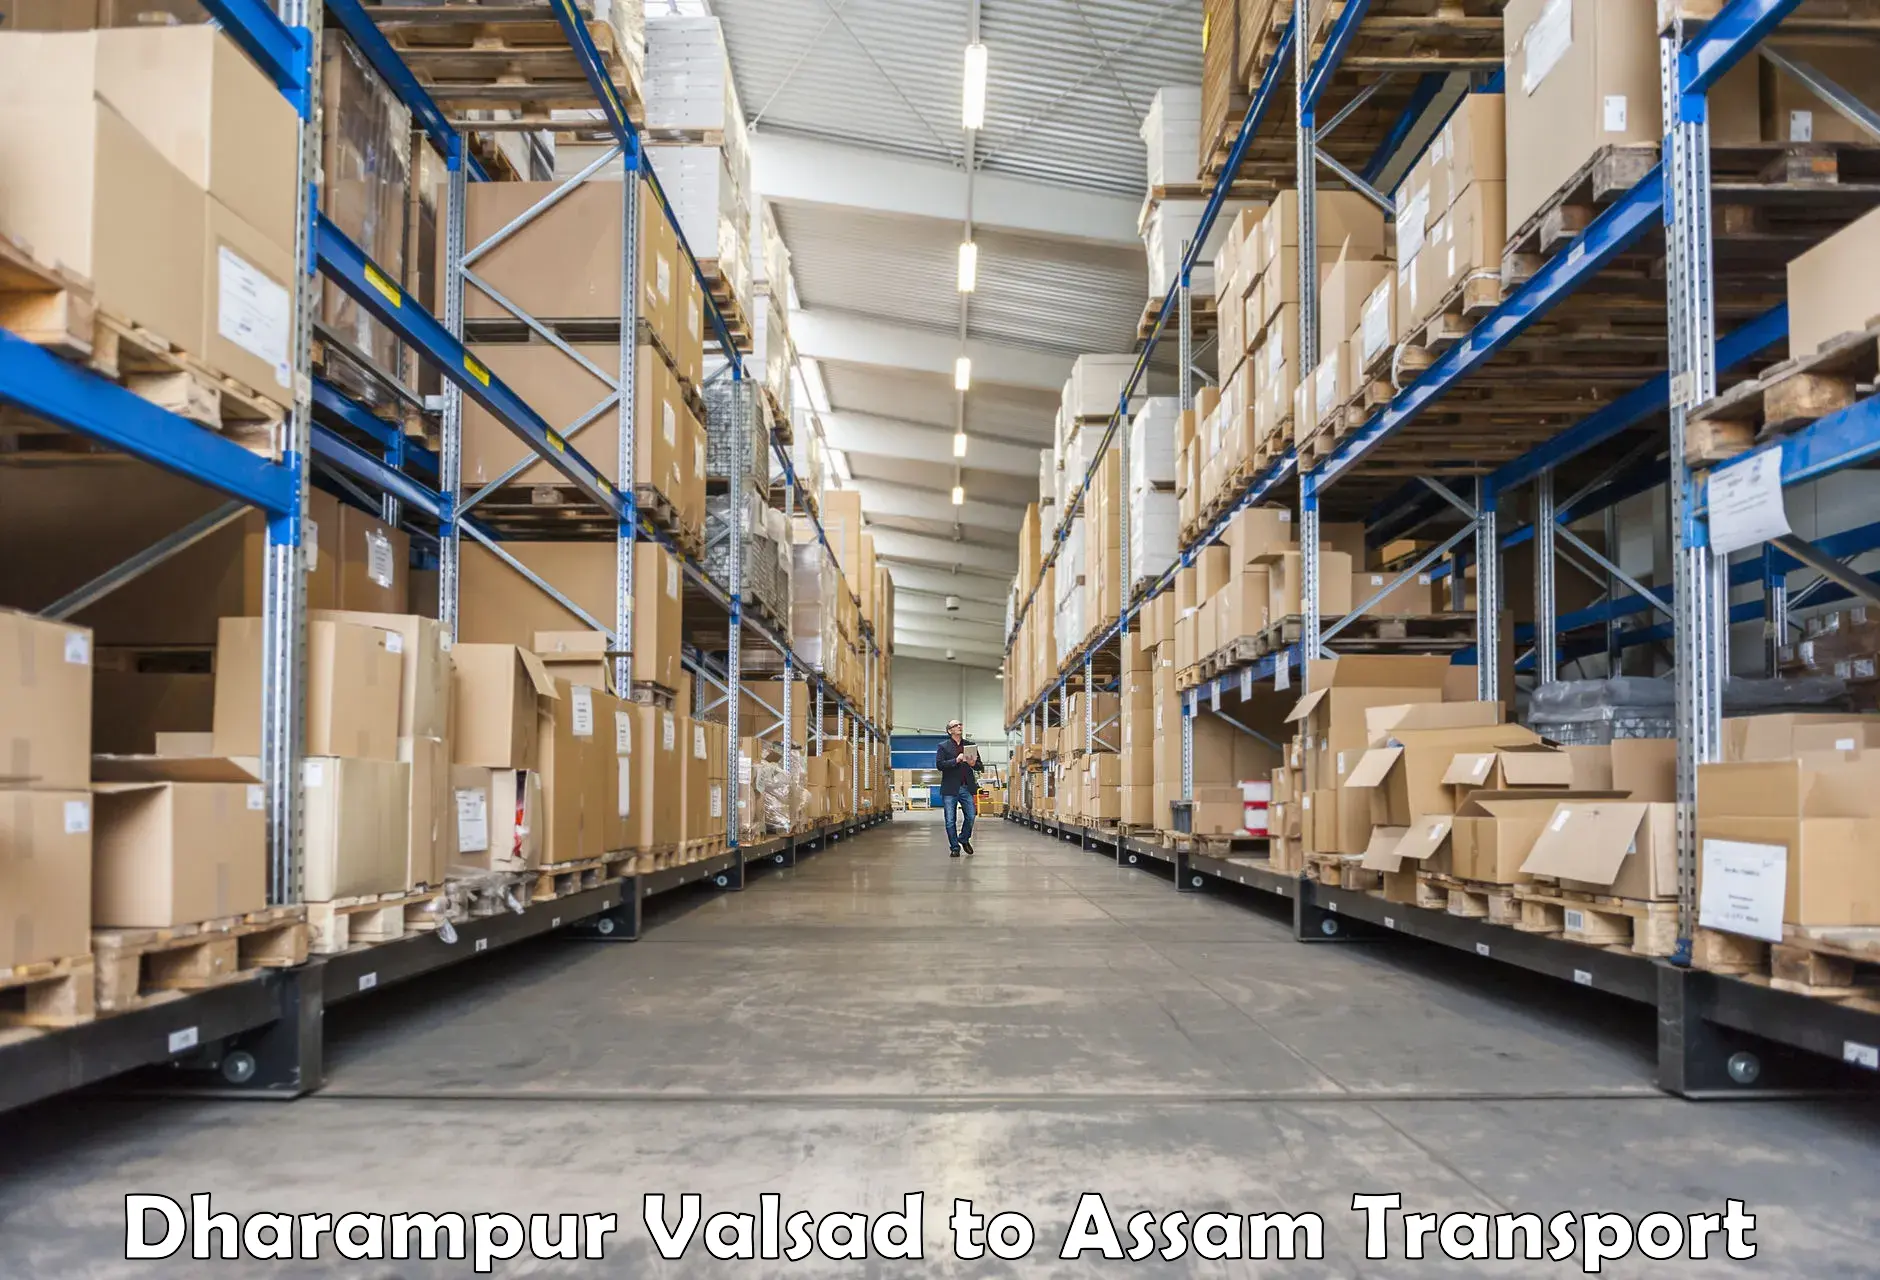 Truck transport companies in India Dharampur Valsad to Digboi